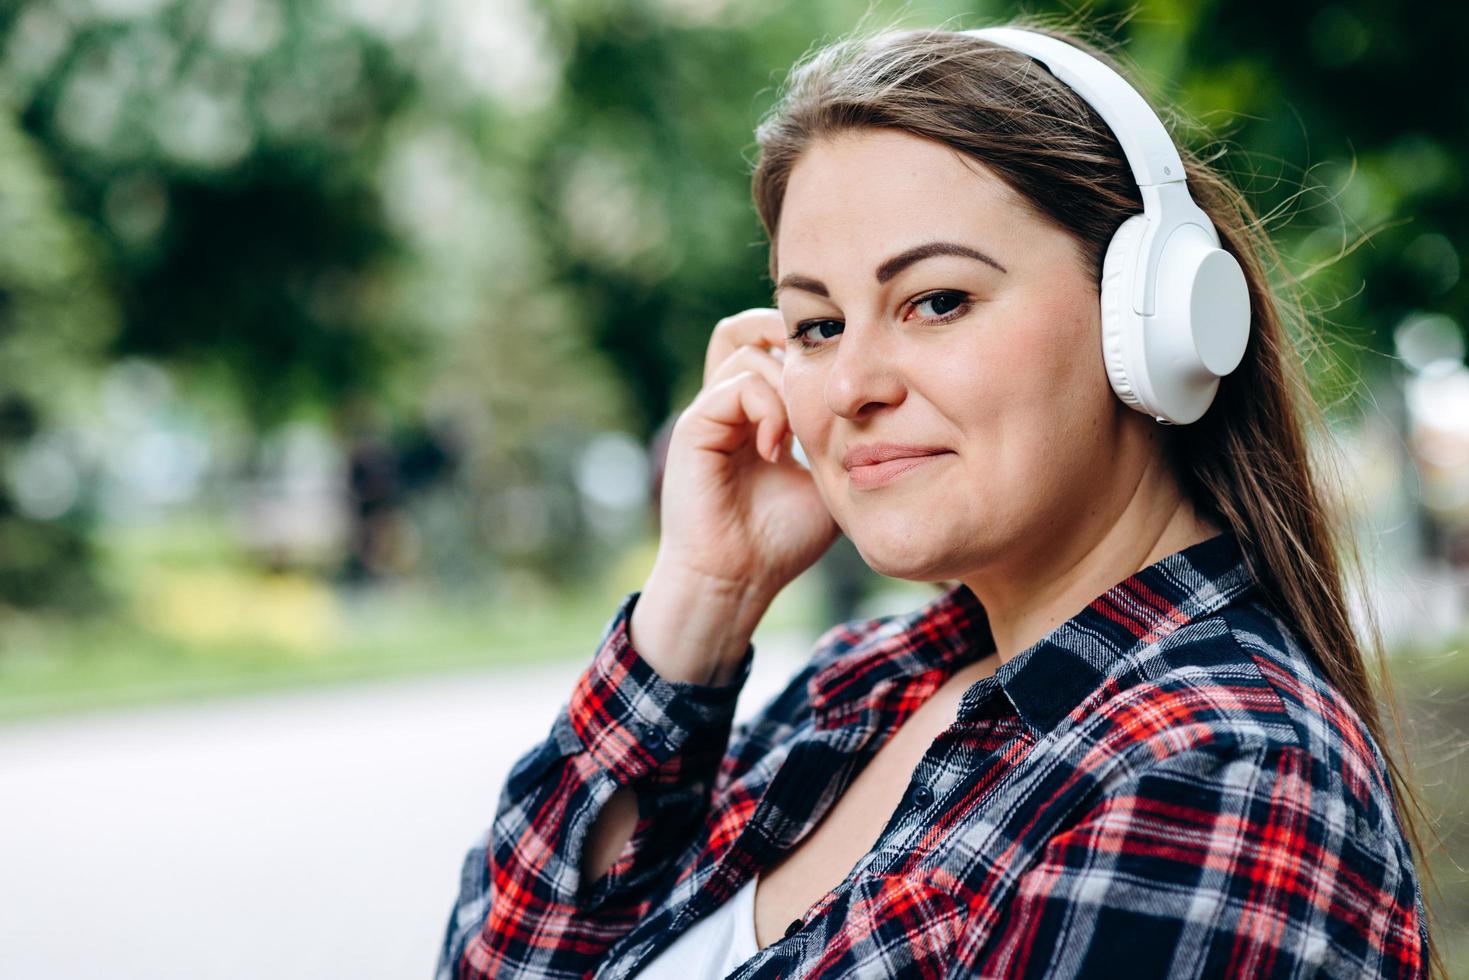 Woman in headphones on a background of the city, cute smiling photo